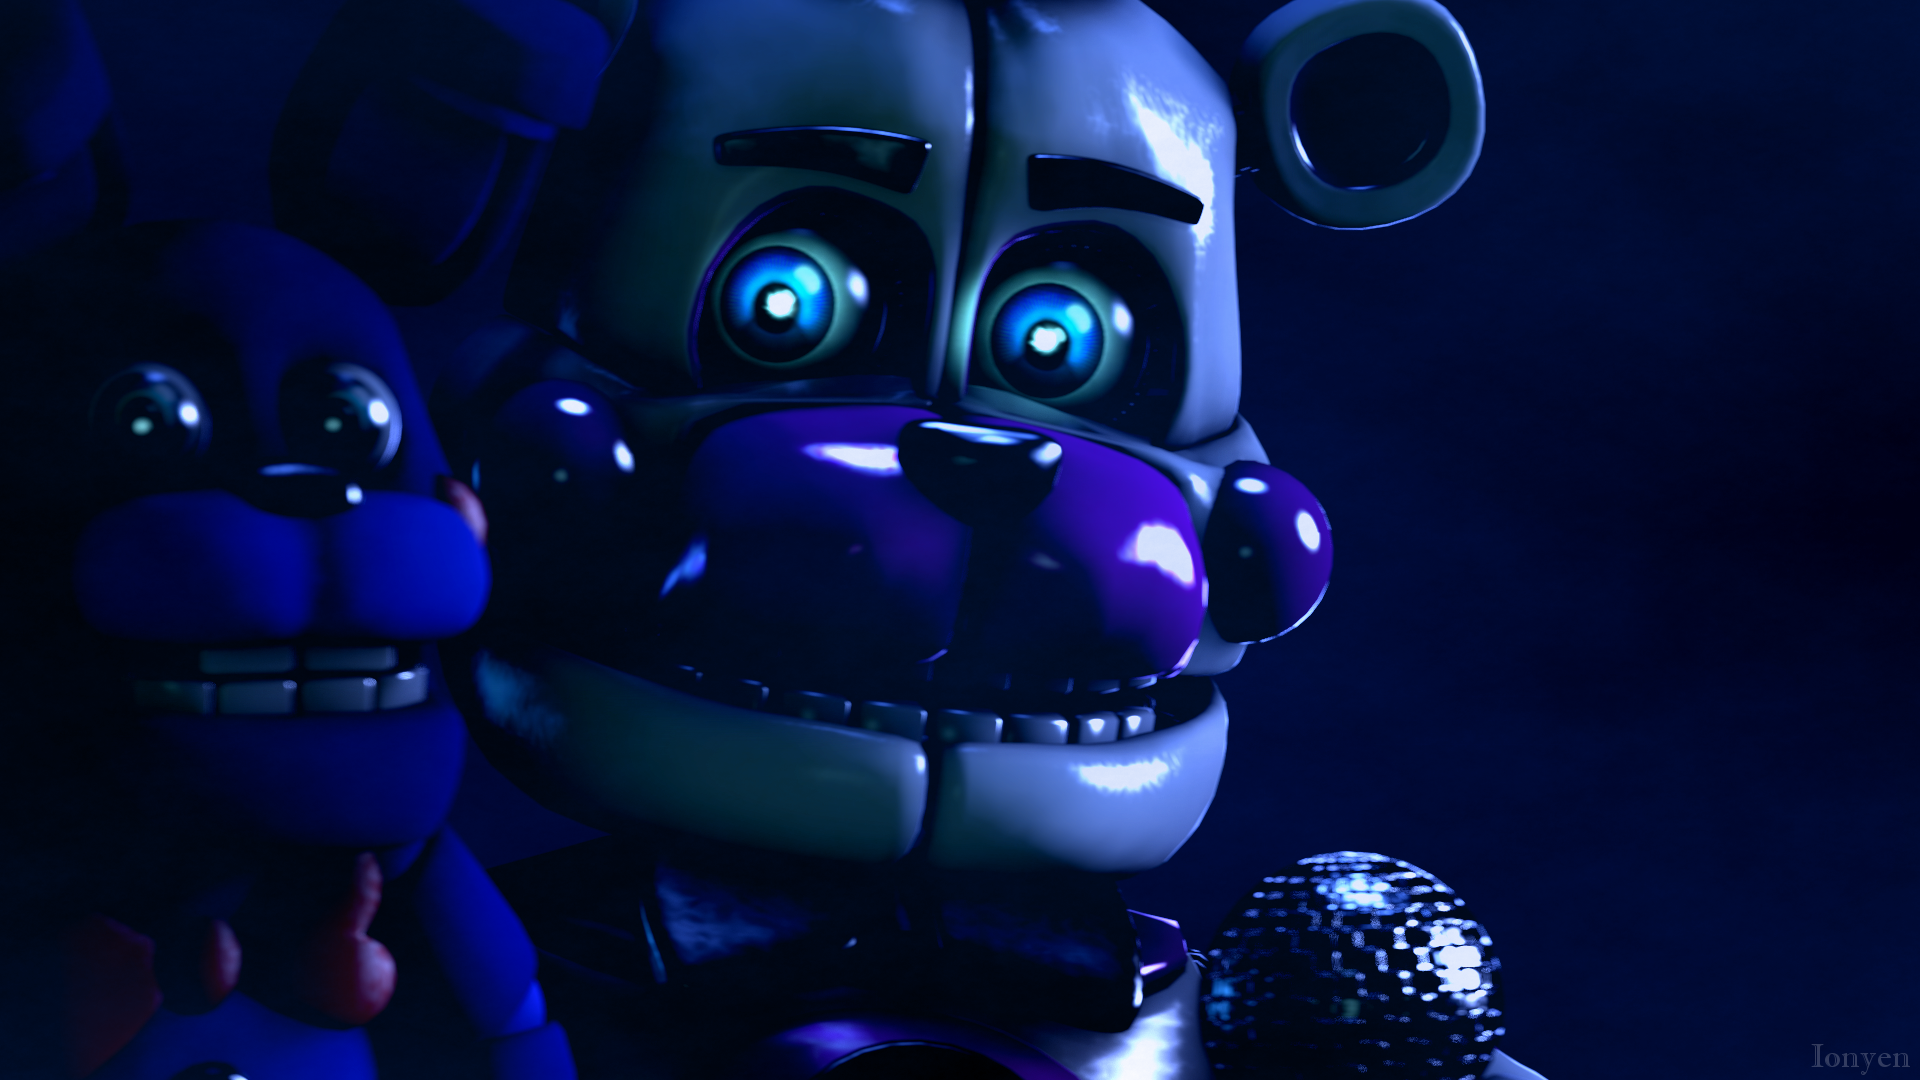 The Show is about to Start (Funtime Freddy)